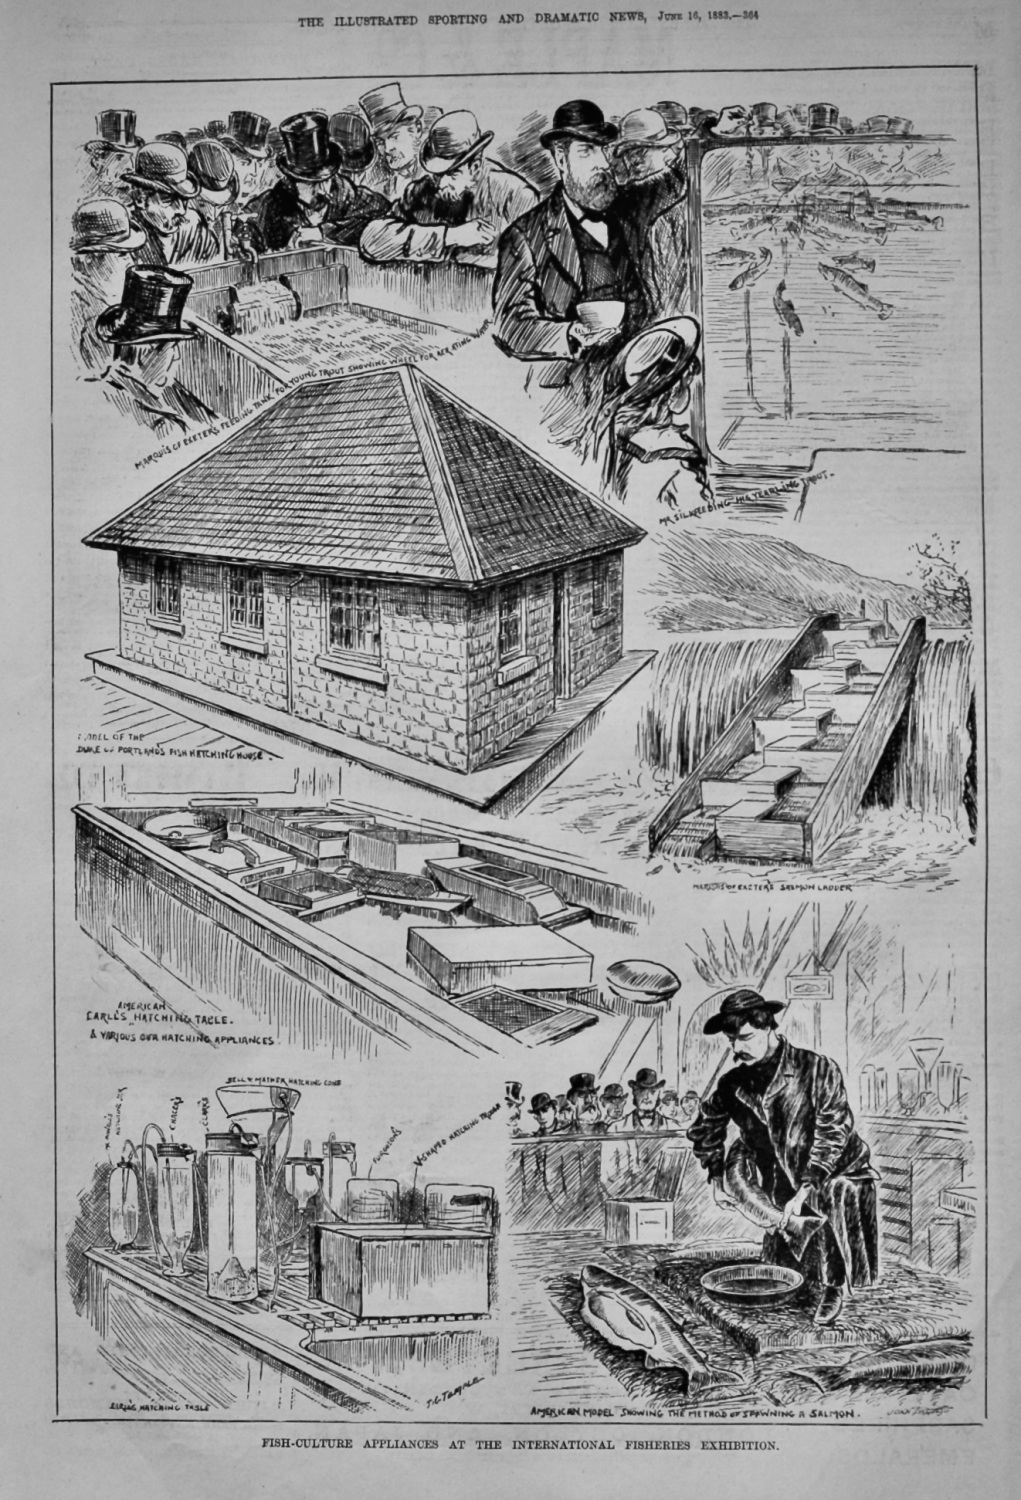 Fish-Culture Appliances at the International Fisheries Exhibition.  1883.